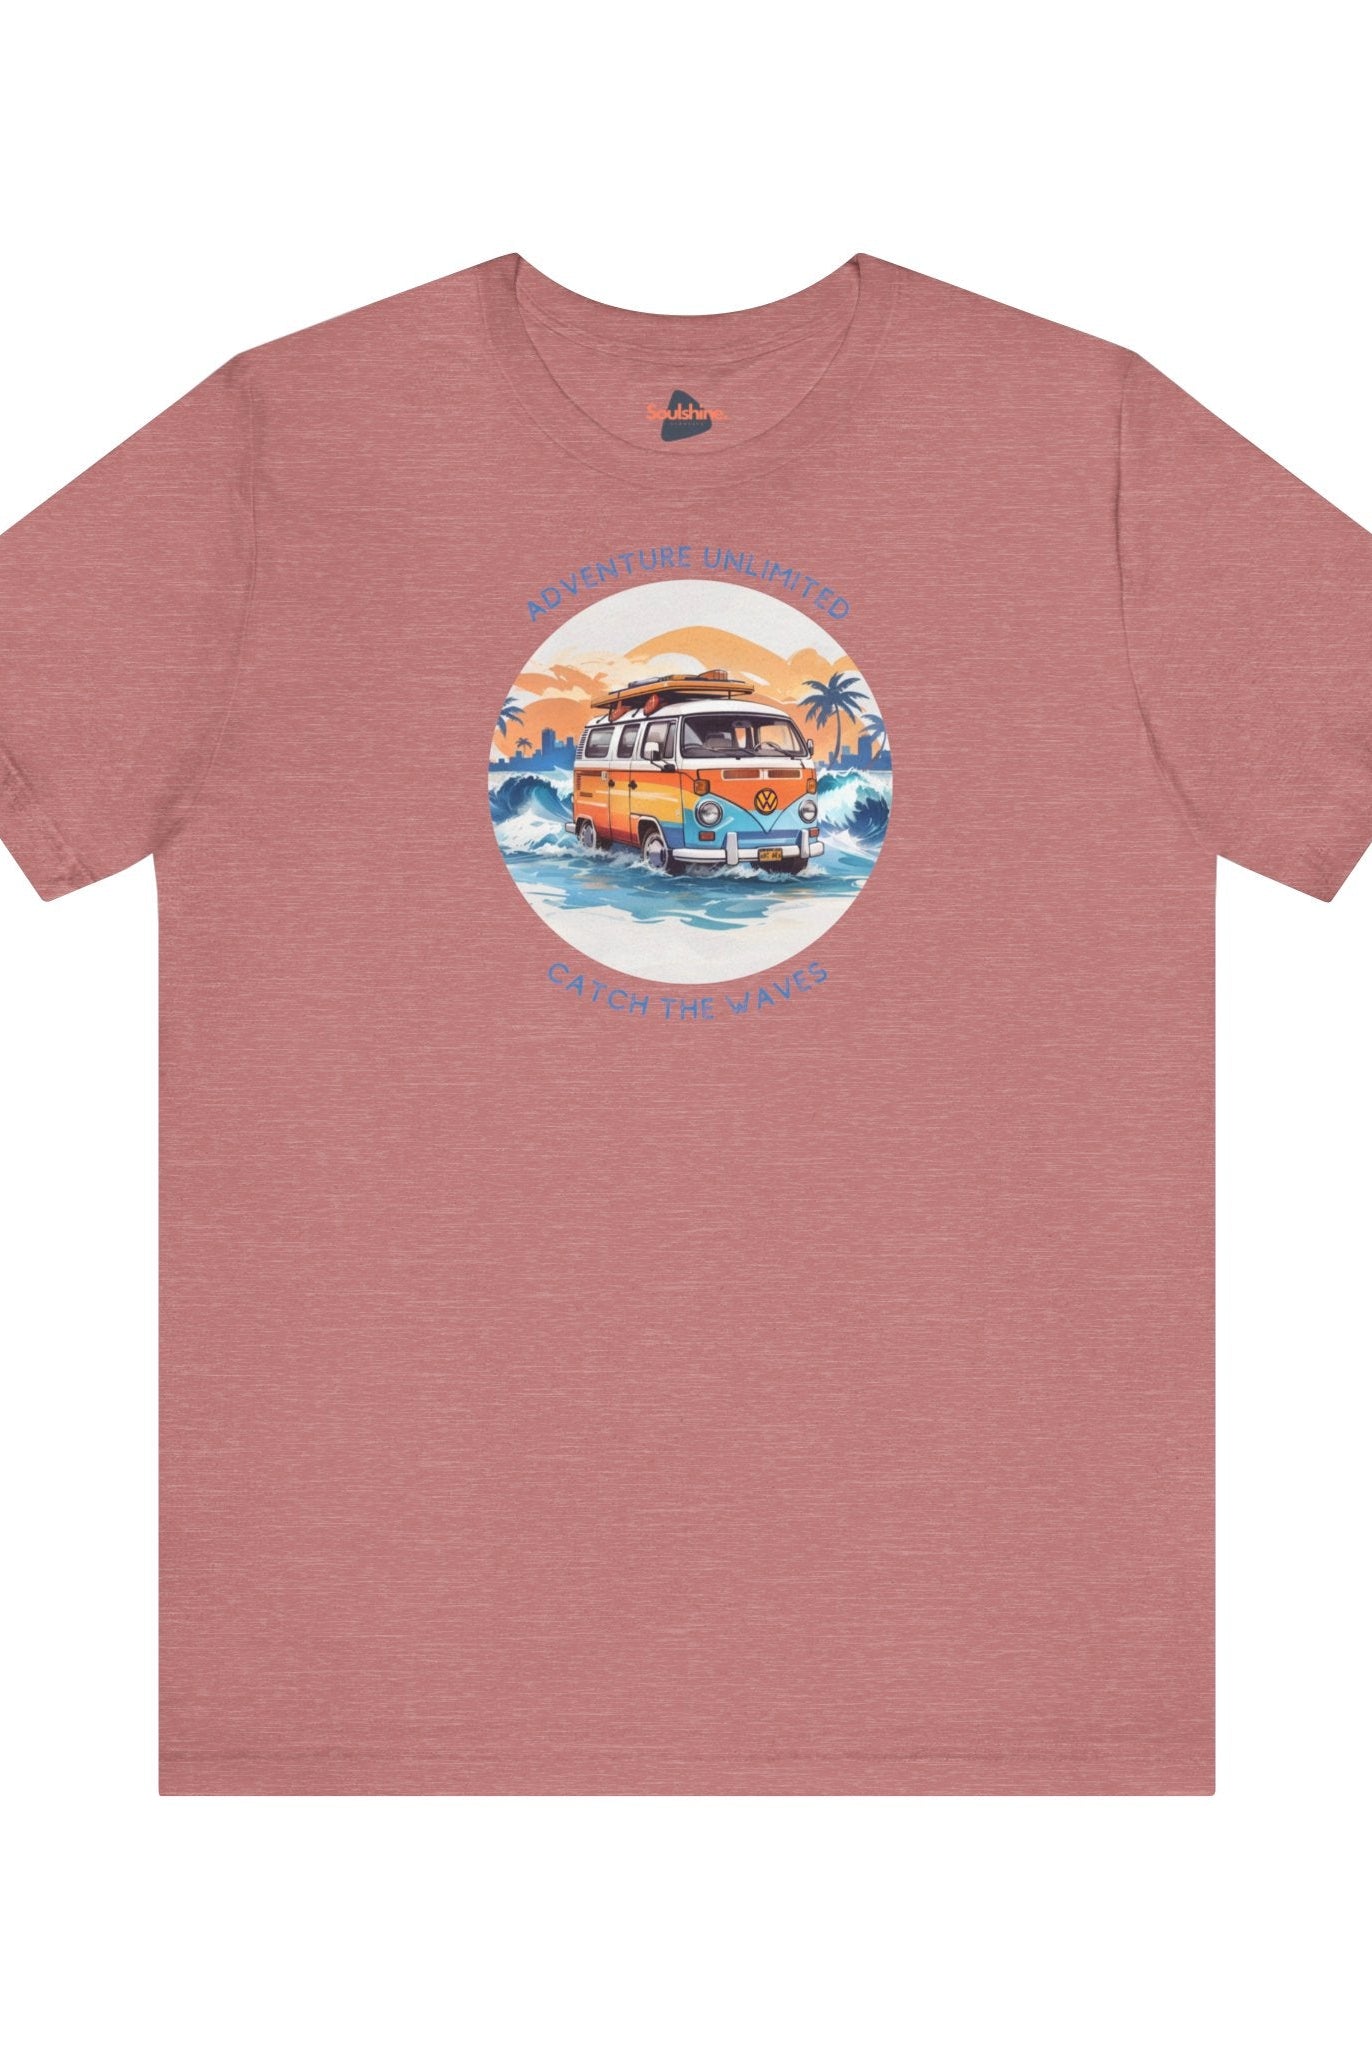 Adventure Unlimited Surfing T-Shirt with Sunset and Boat, Bella & Canvas EU Printed Item